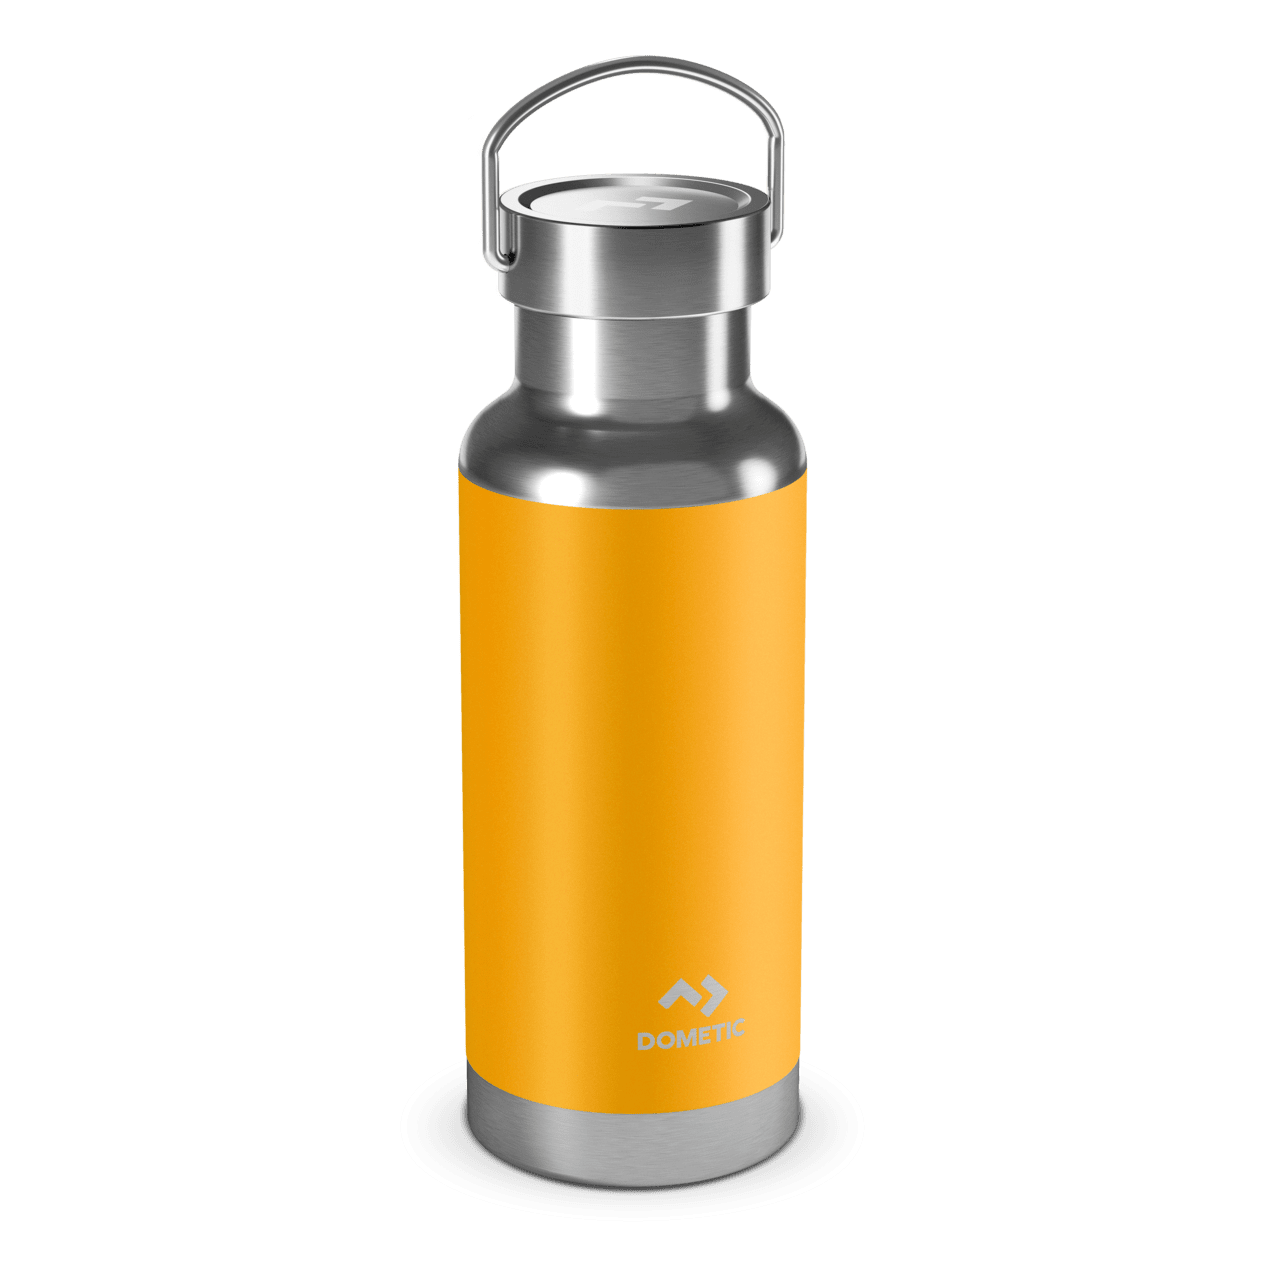 Dometic Thermo Bottle 48 Glow